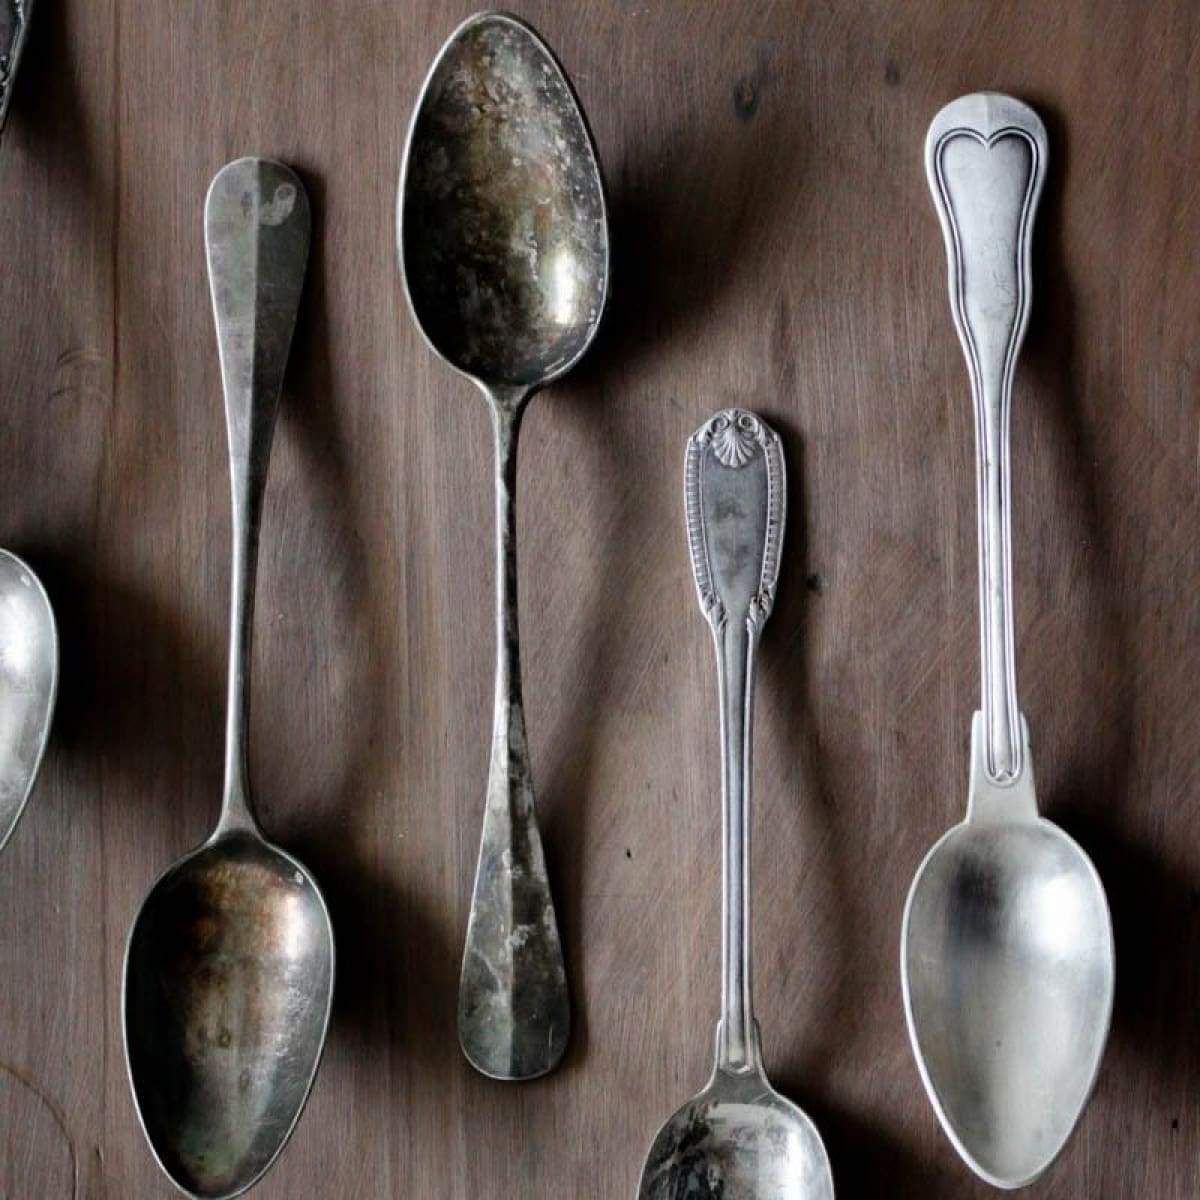 elsie green LARGE FRENCH SERVING SPOON